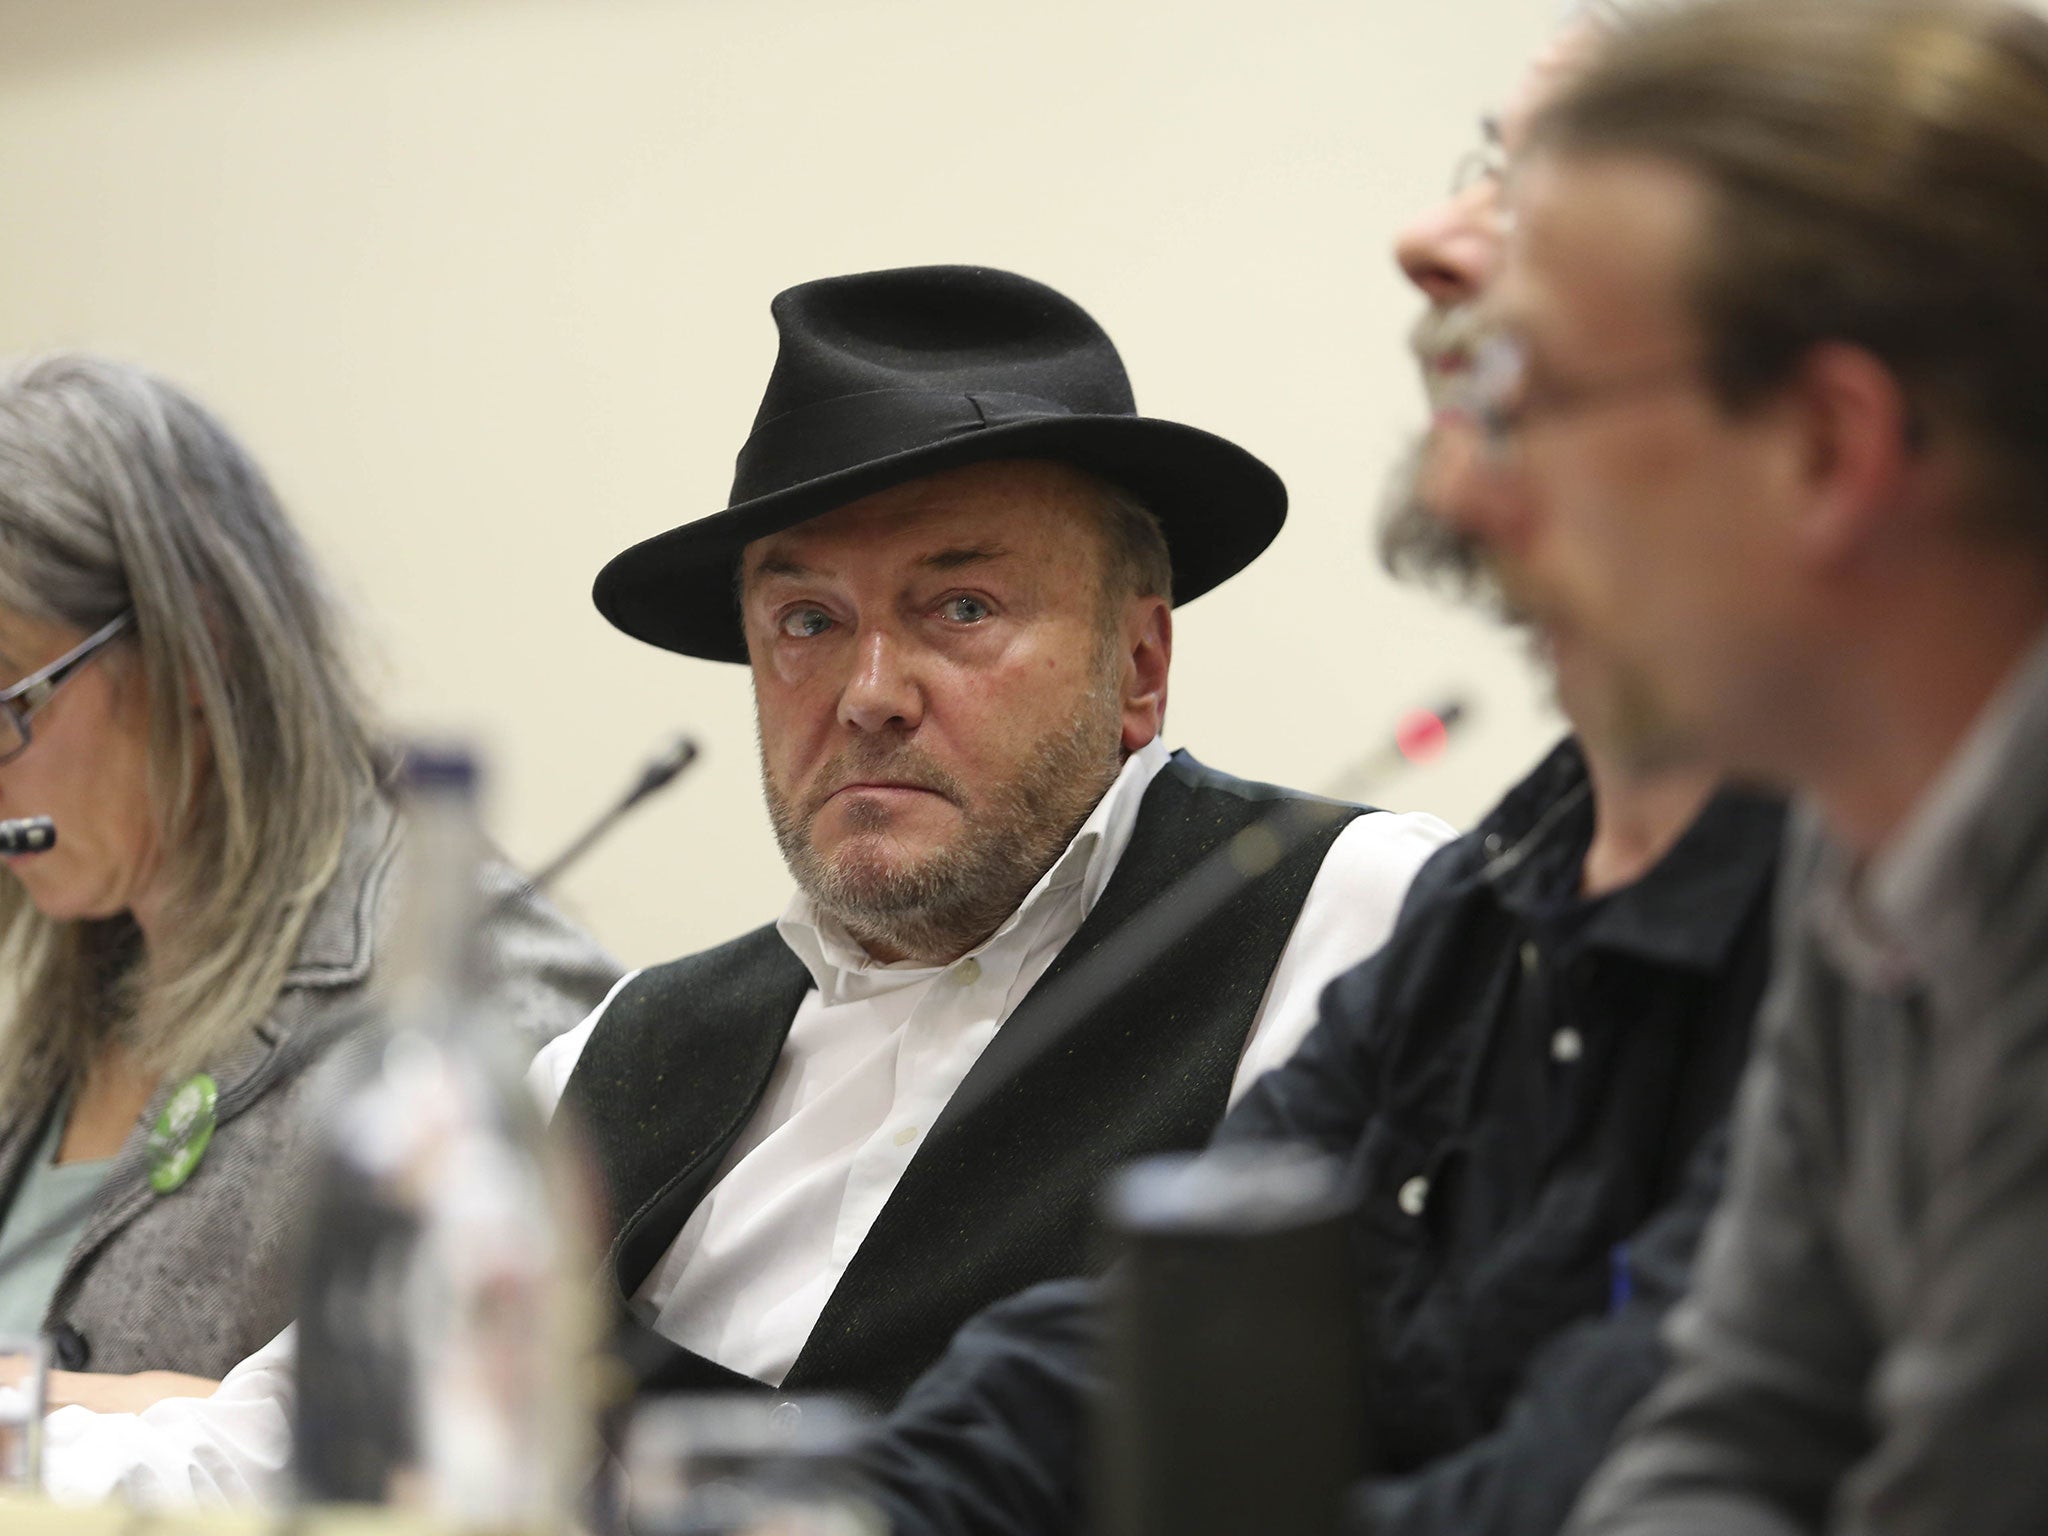 Around 200 university staff and students gathered for the Bradford West hustings where George Galloway was sat well away from his Labour rival Naz Shah